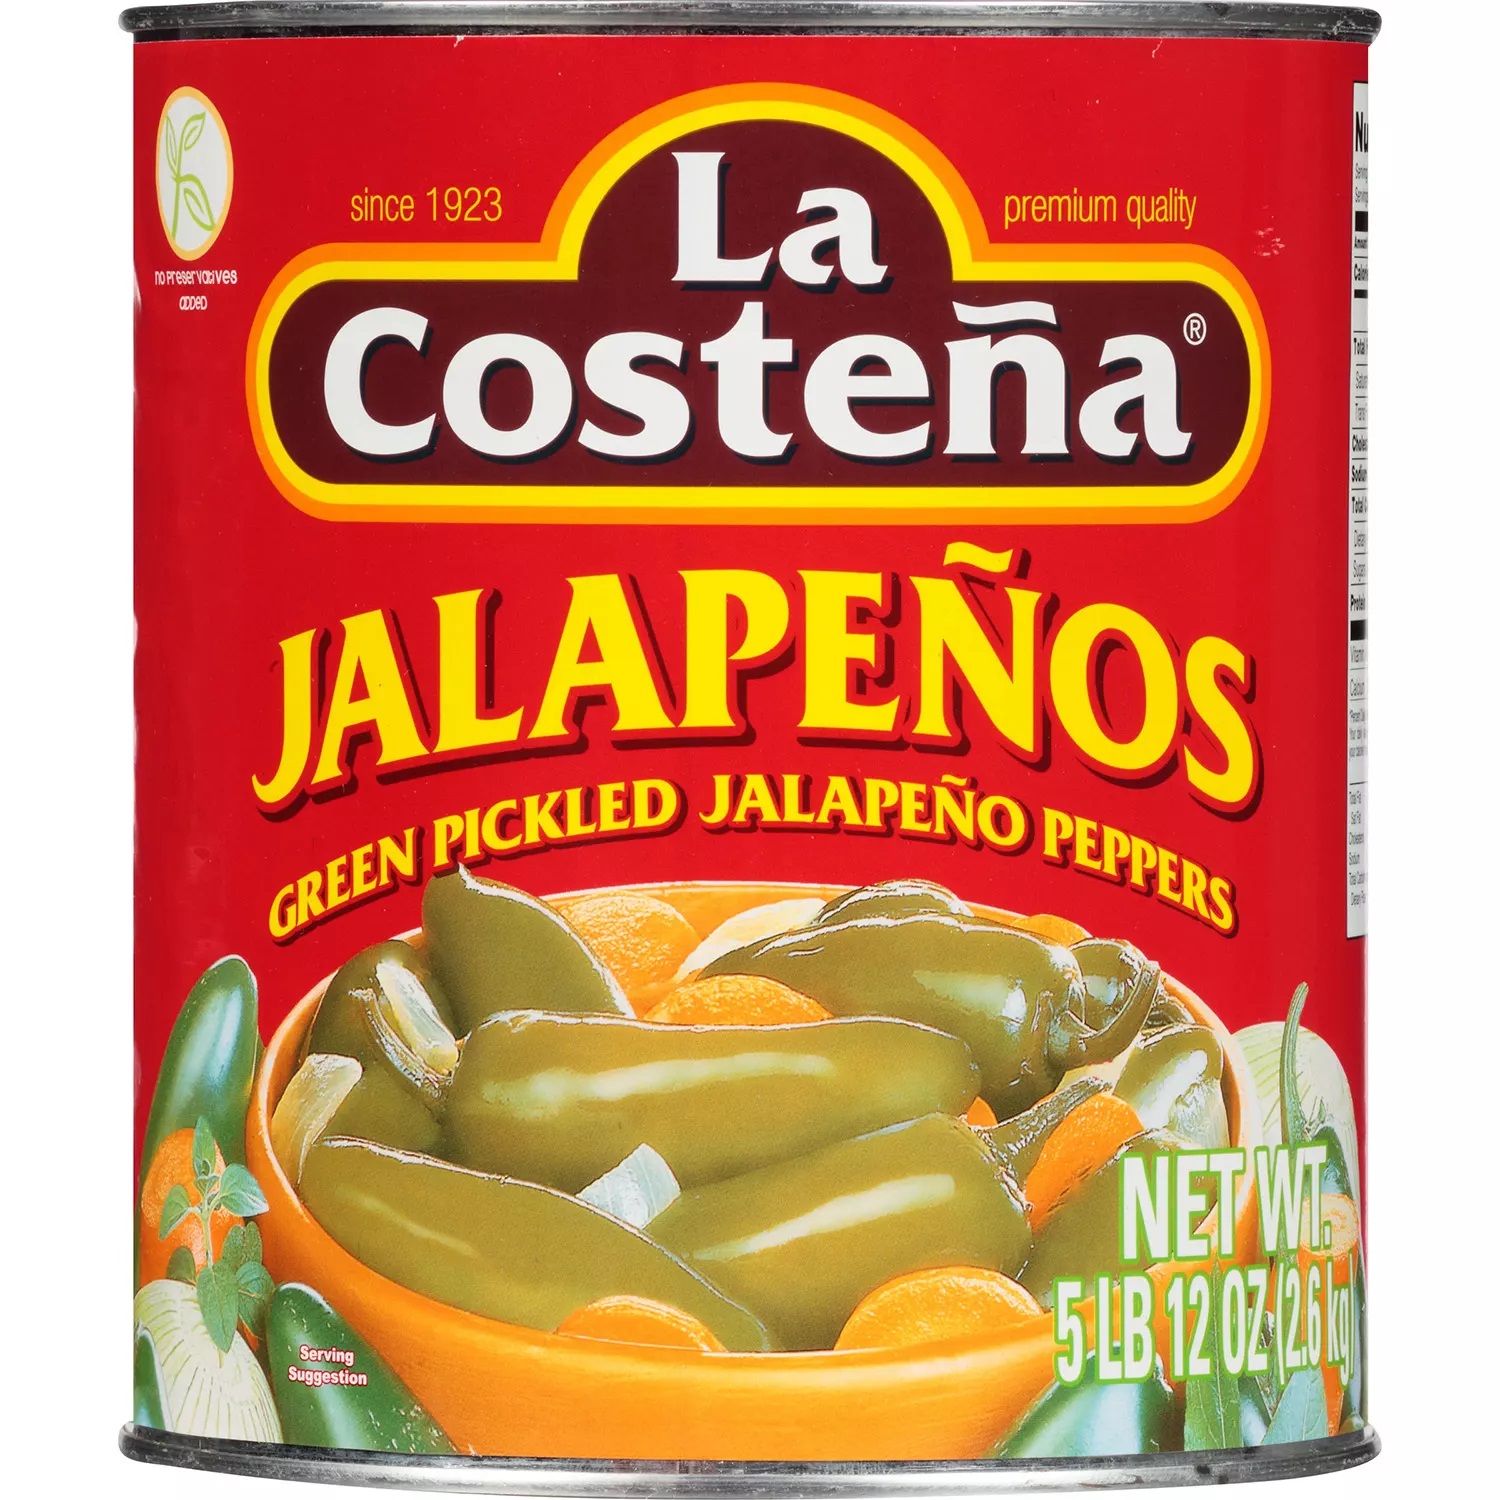 La Costena Jalapeno Peppers - 93 Ounce can